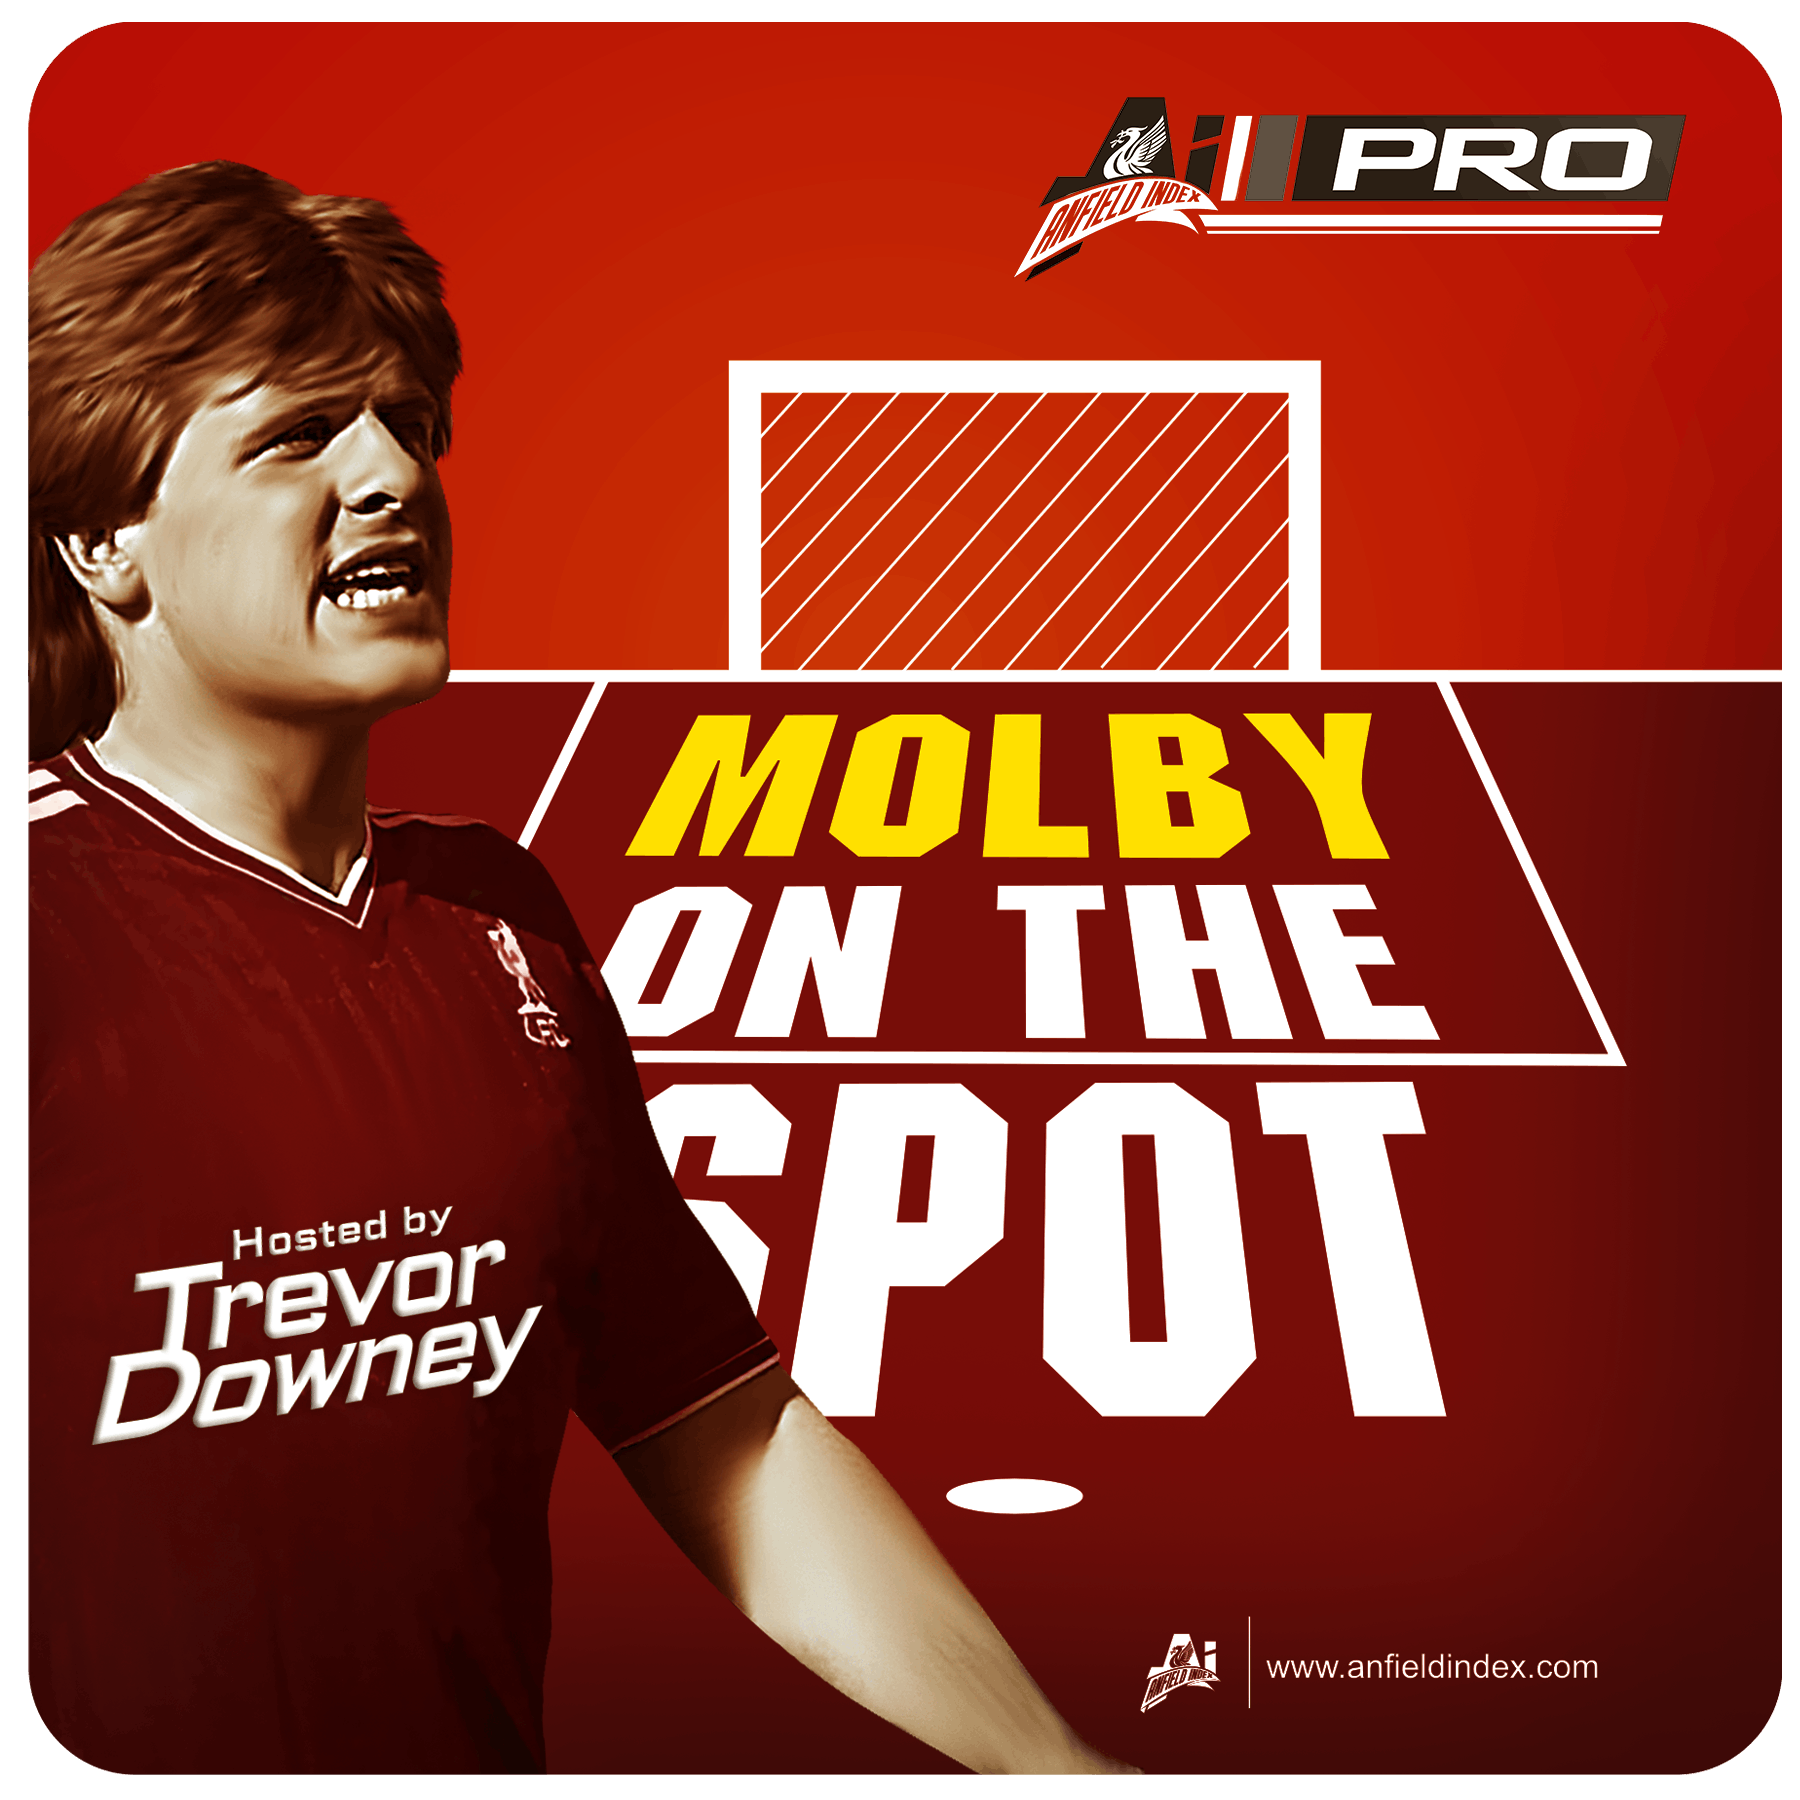 Riding The Wave: Molby On The Spot